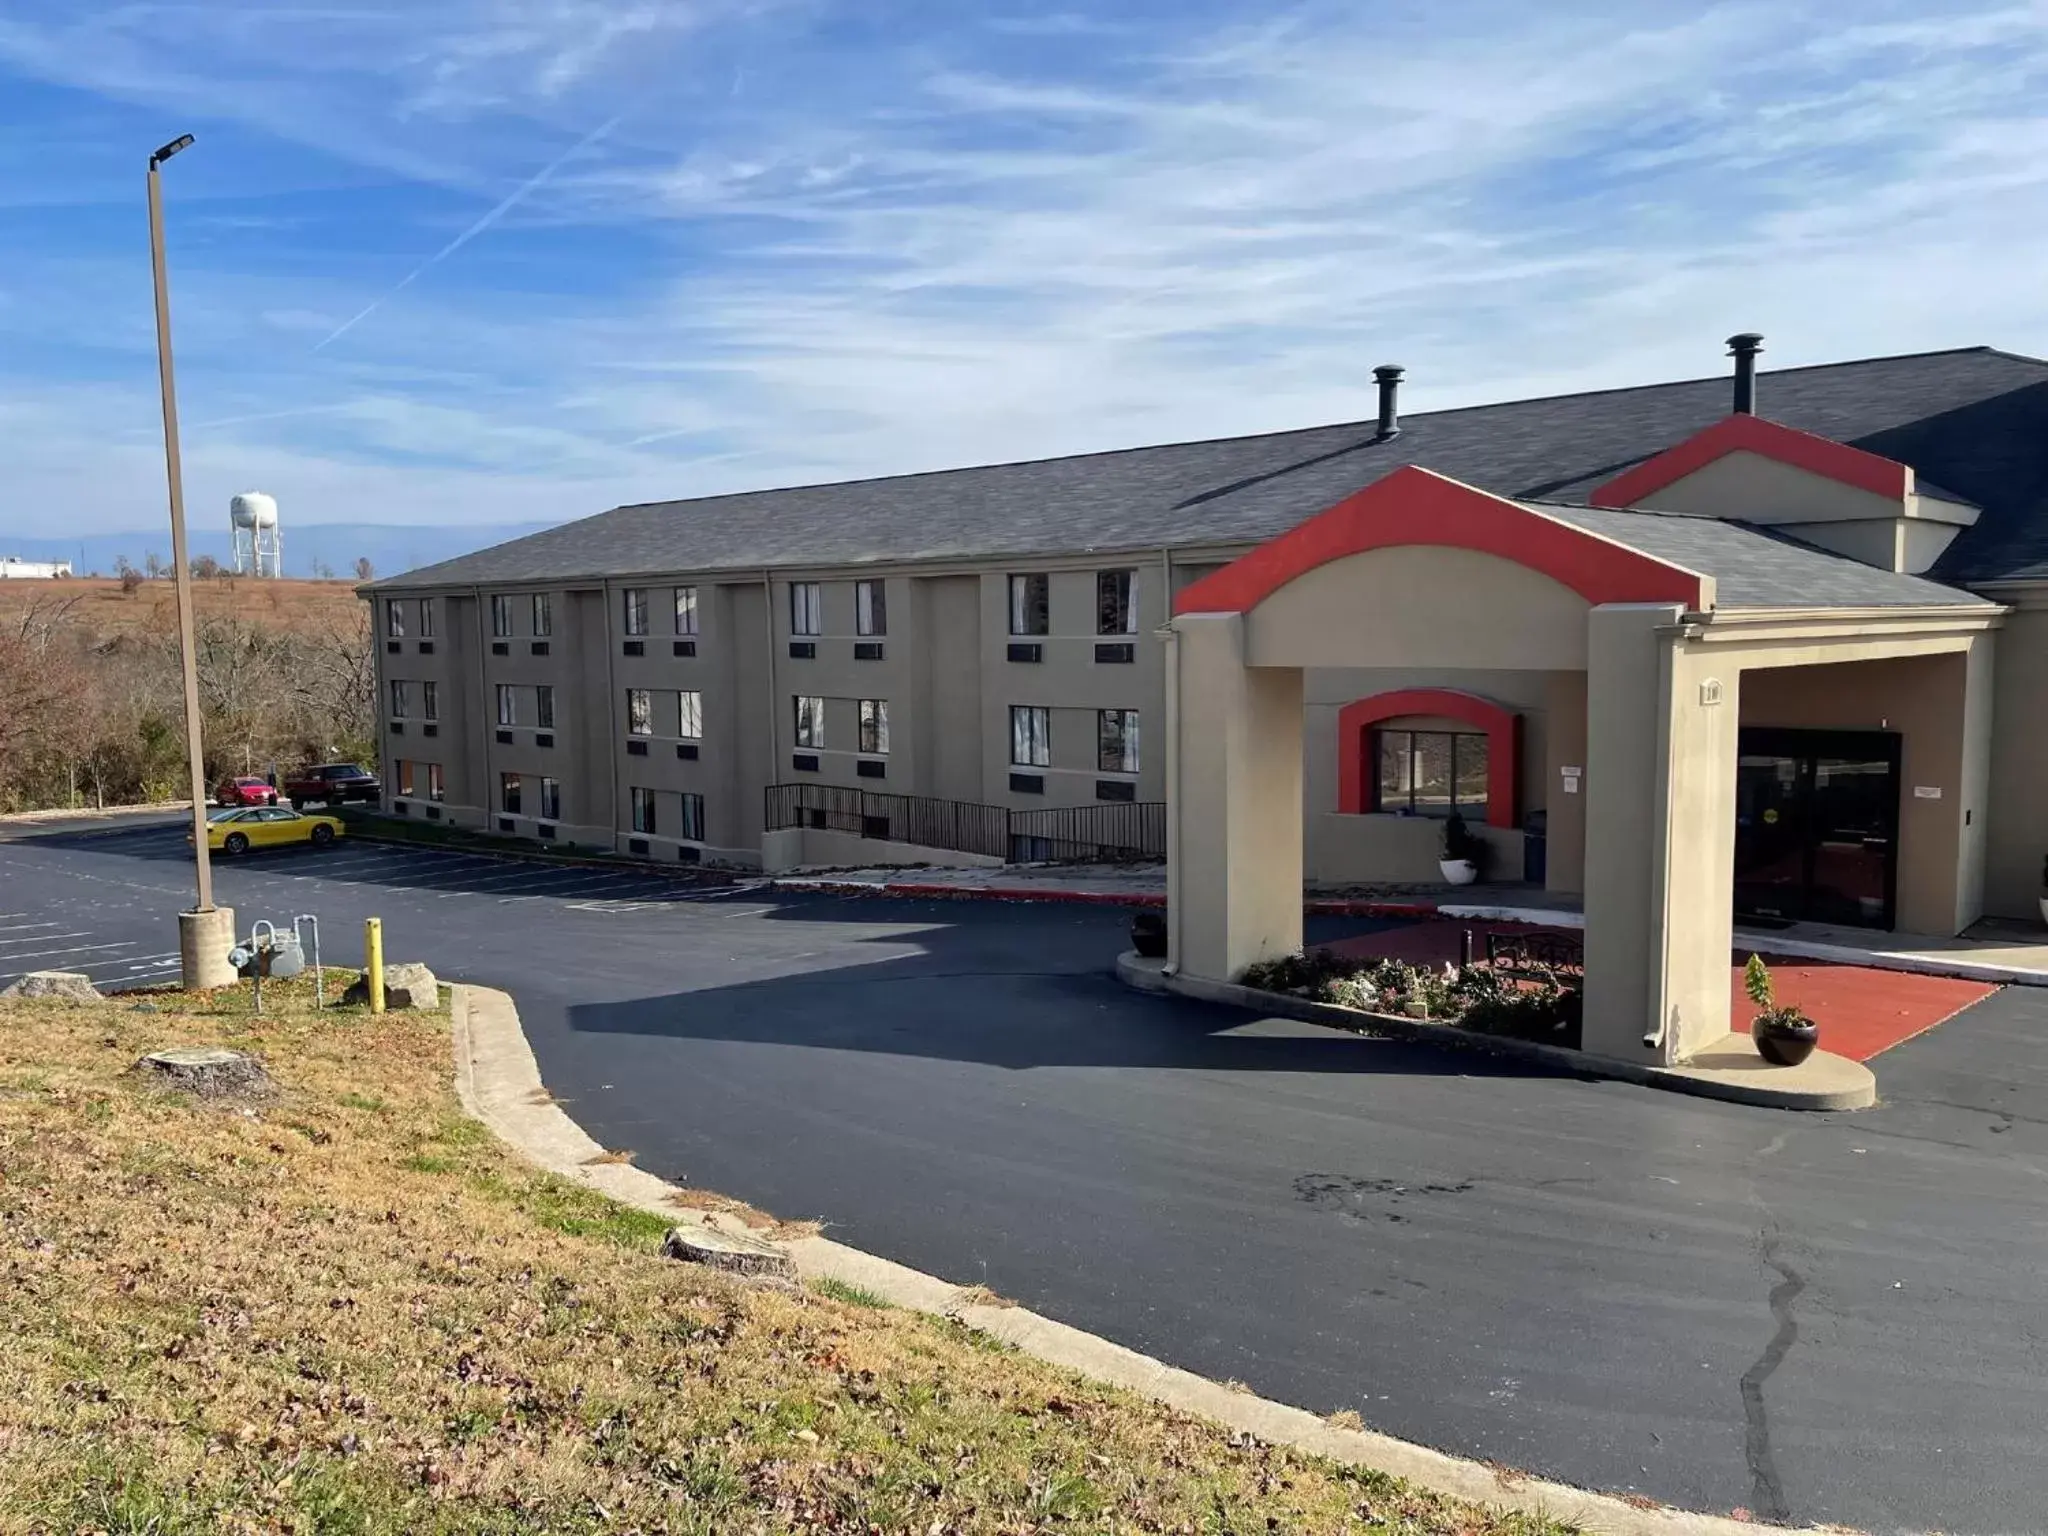 Property Building in Red Roof Inn Branson